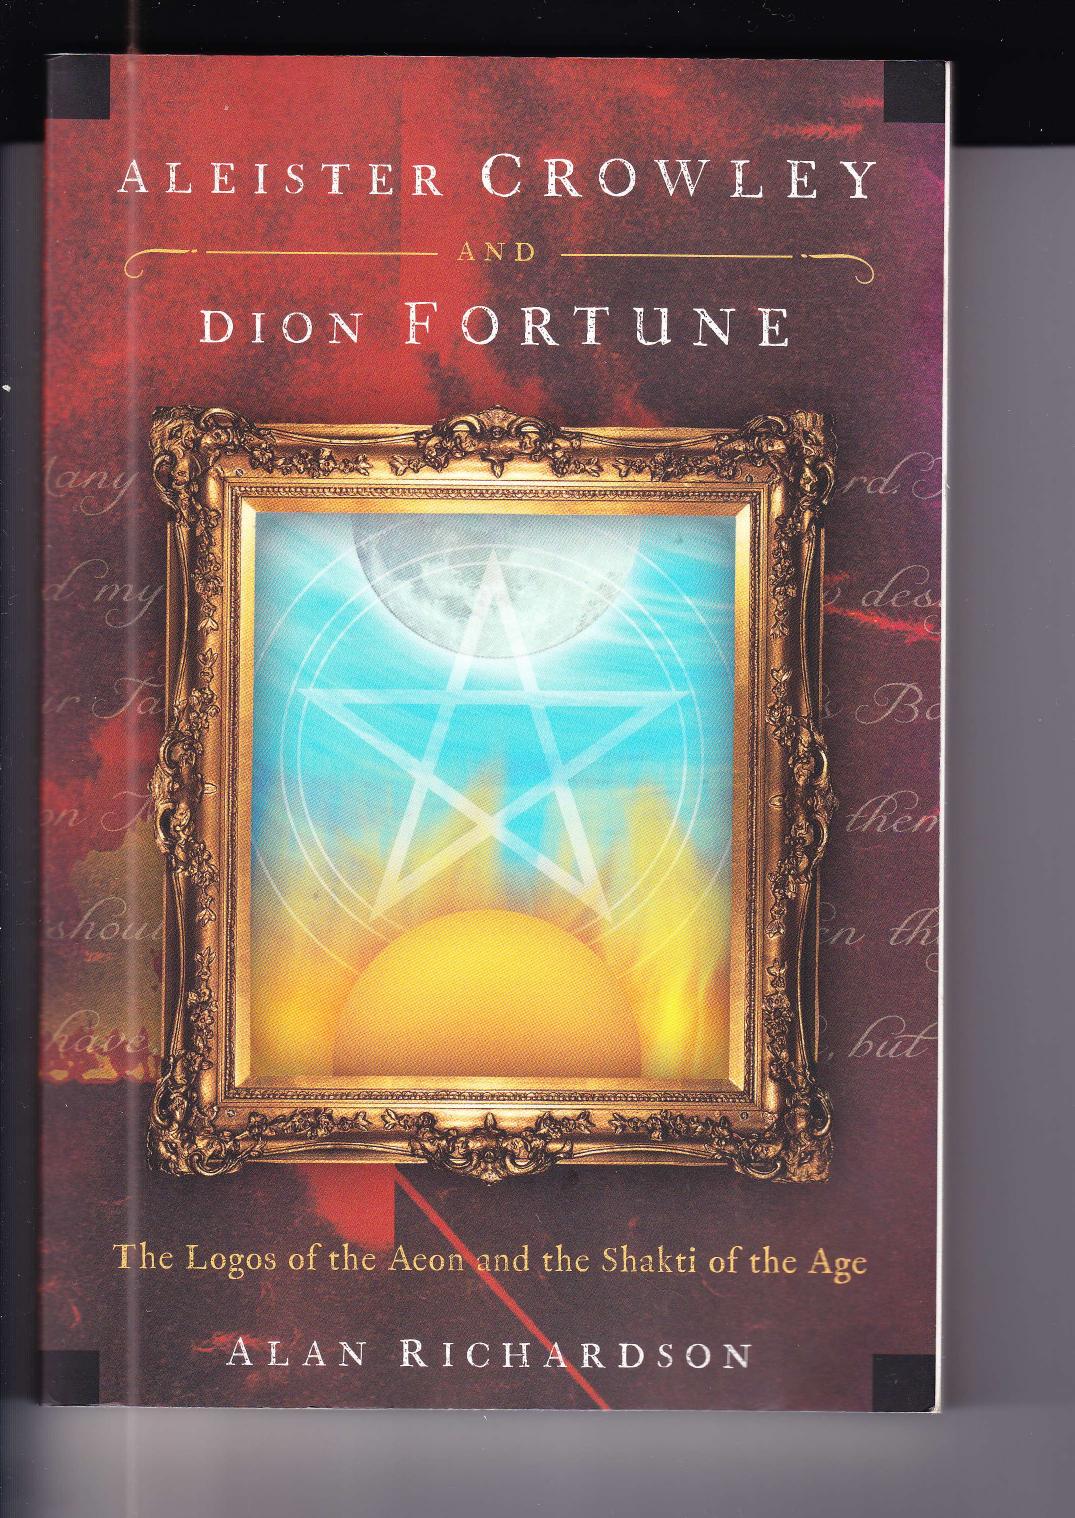 Aleister Crowley and Dion Fortune: The Logos of the Aeon and the Shakti of the Age by Alan Richardson